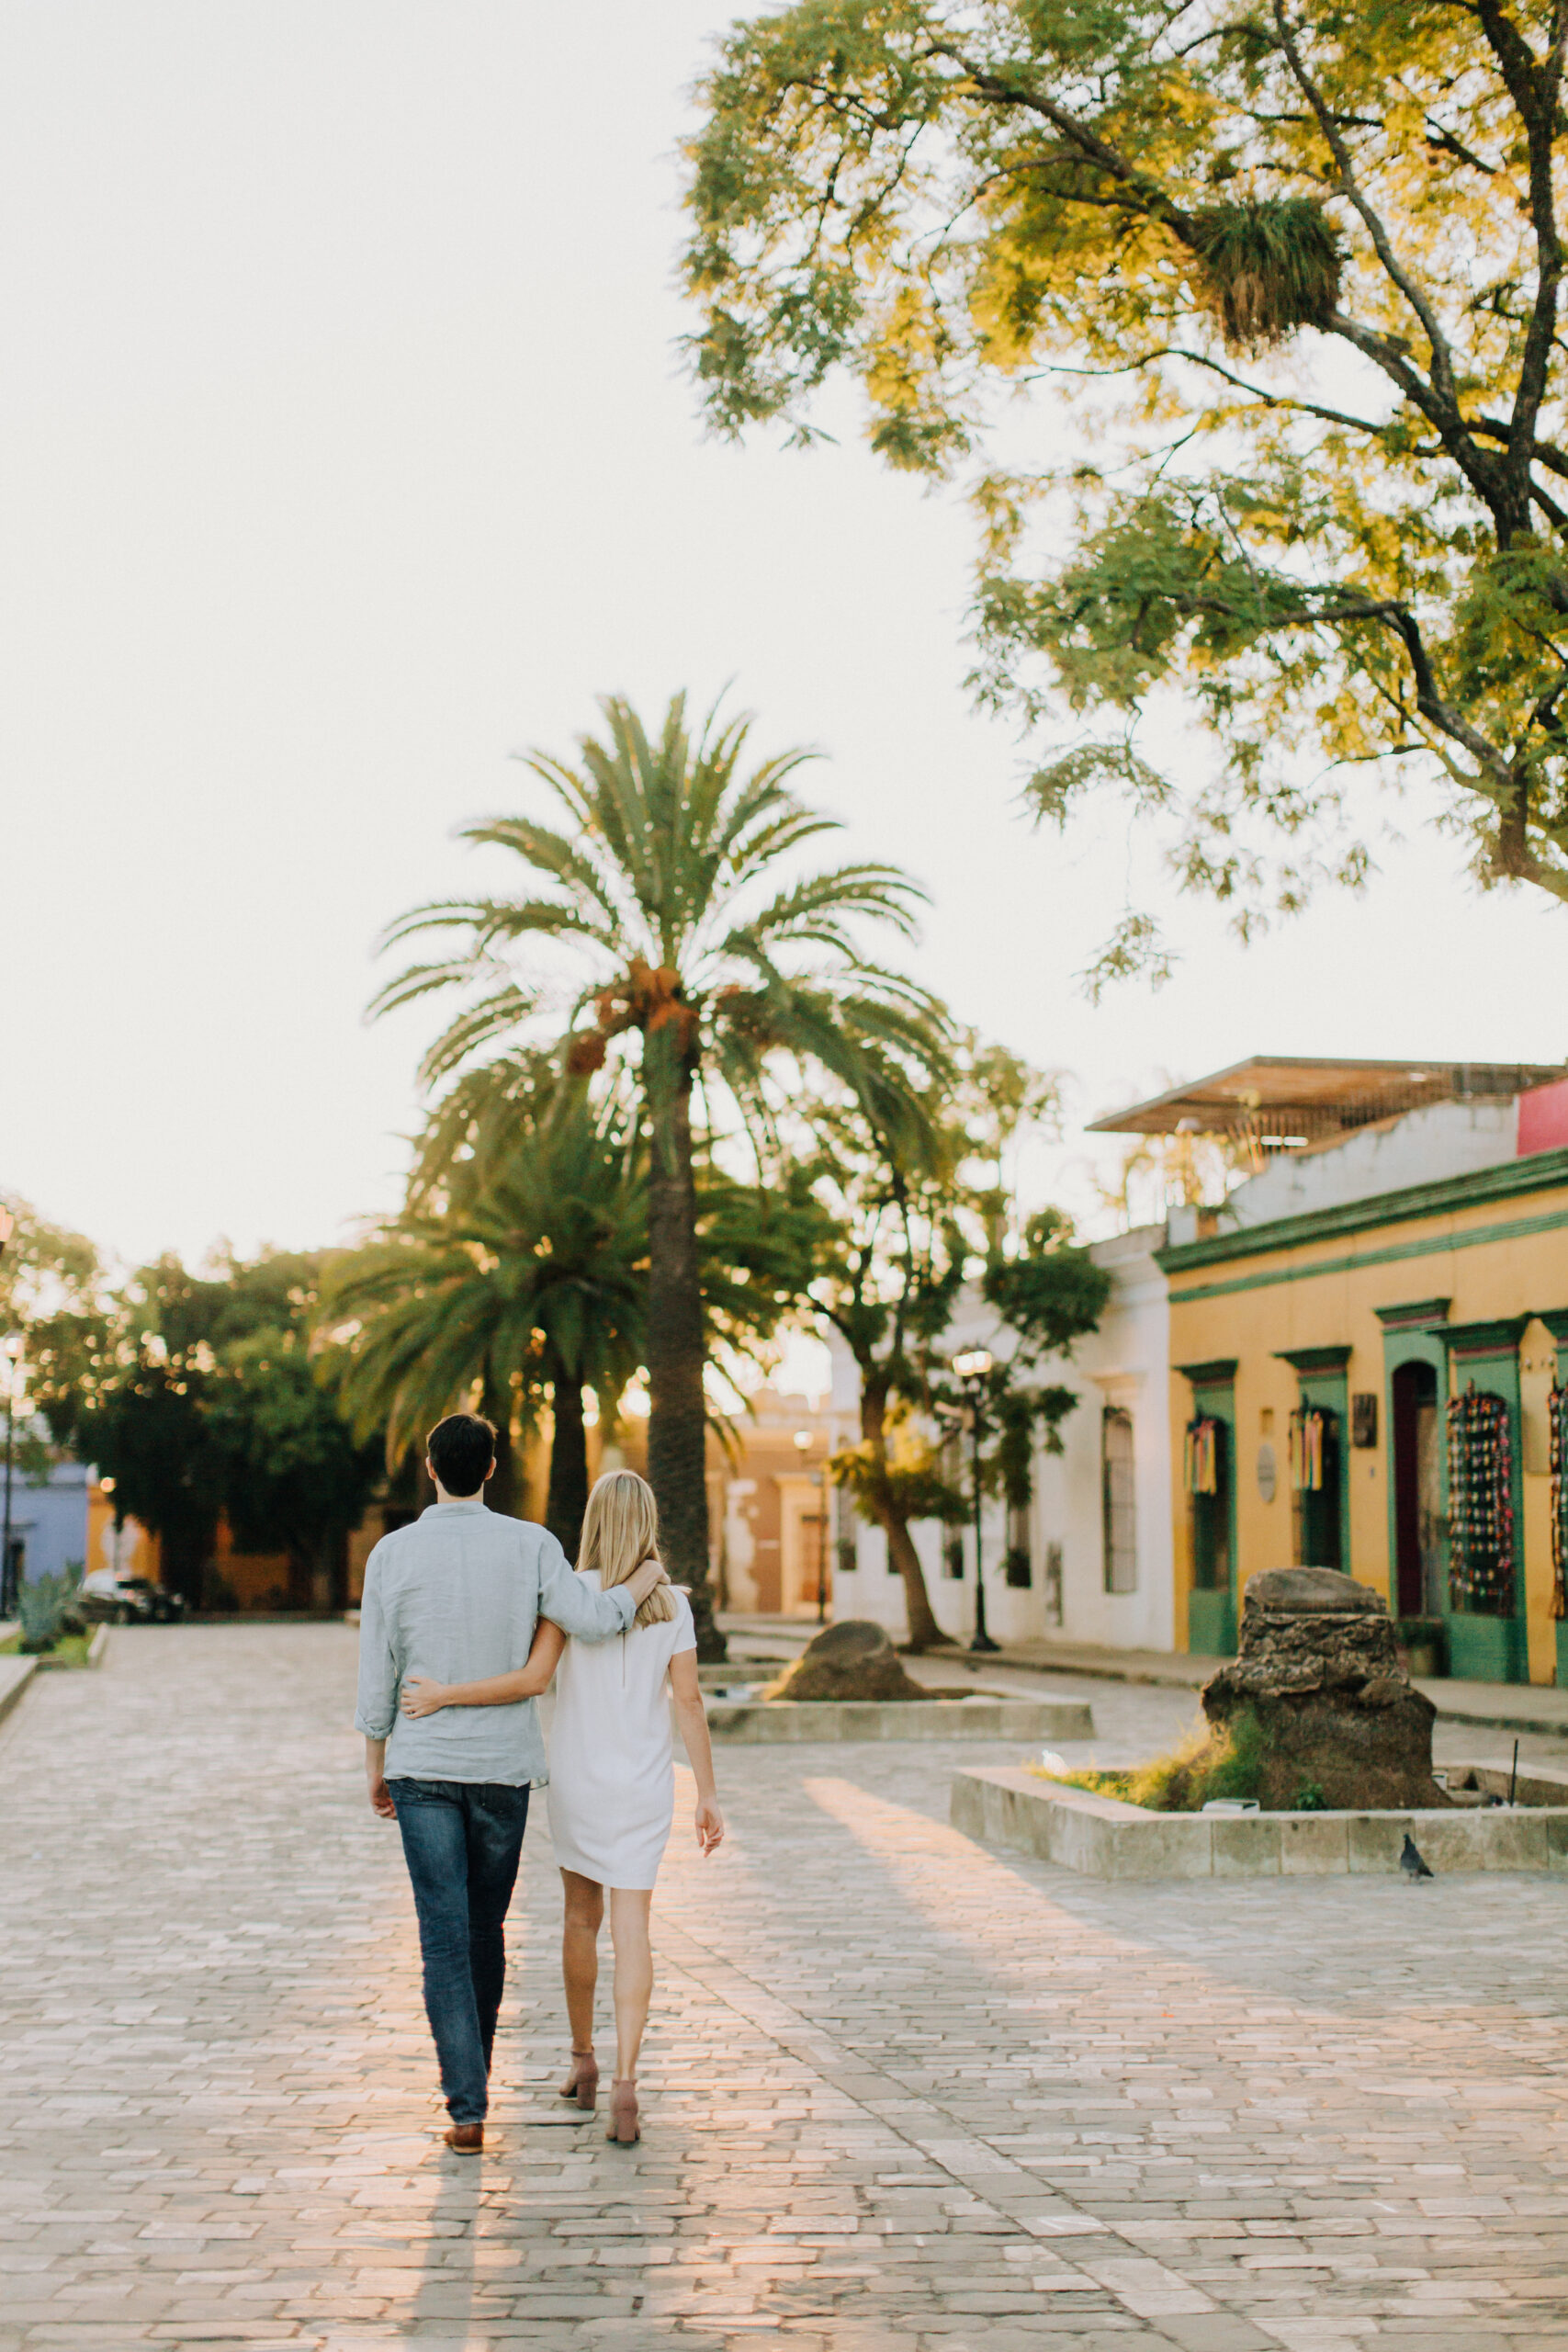 beautiful couple walk together in Oaxaca with the dreamy palm trees in the background